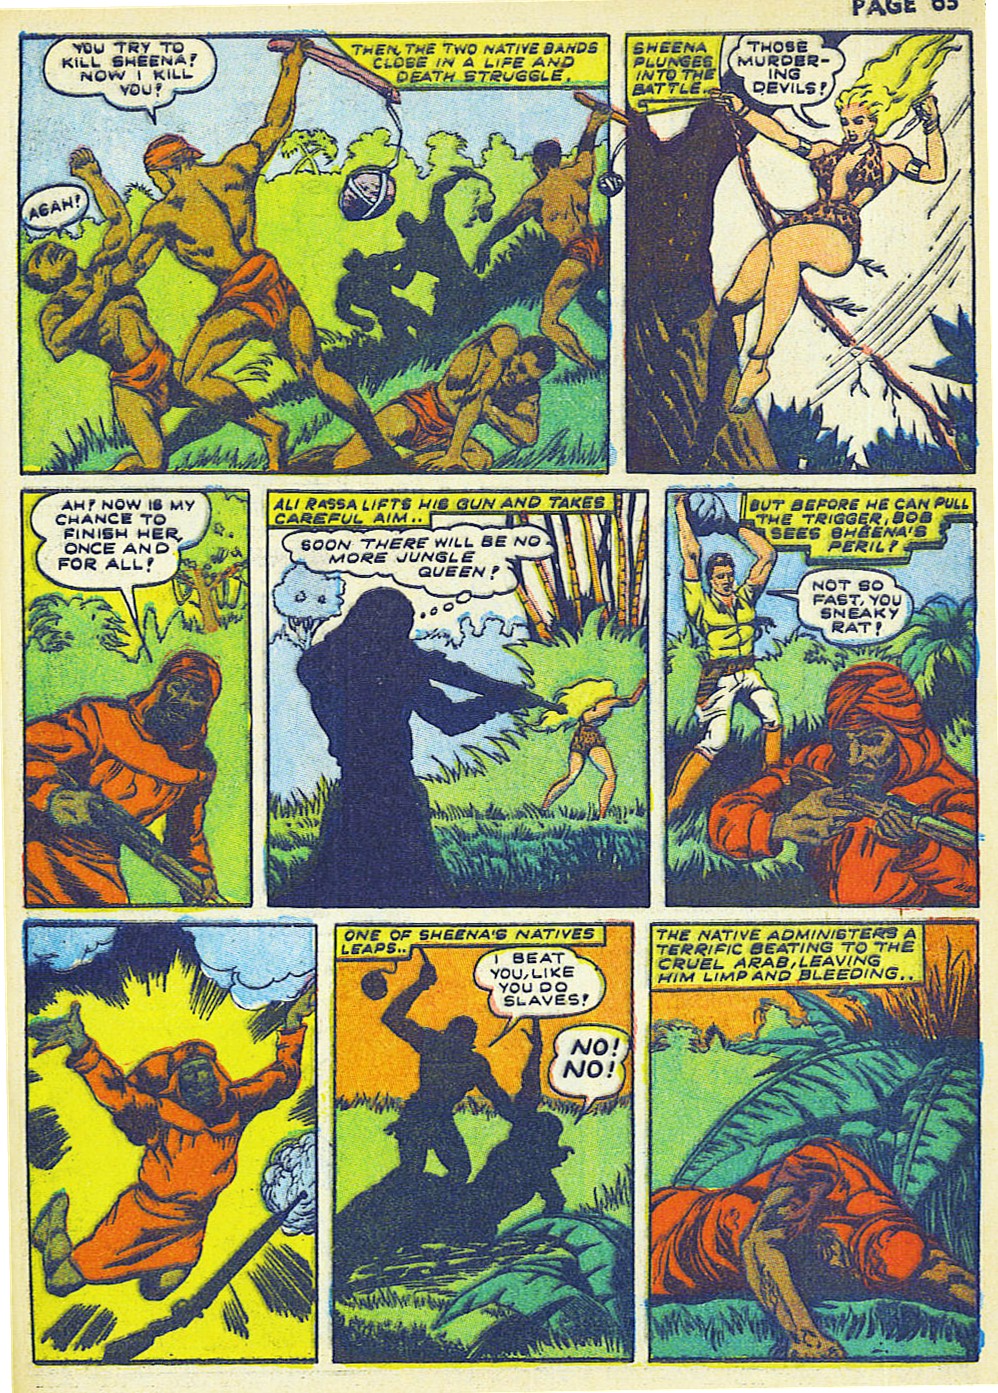 Sheena, Queen of the Jungle (1942) issue 2 - Page 65